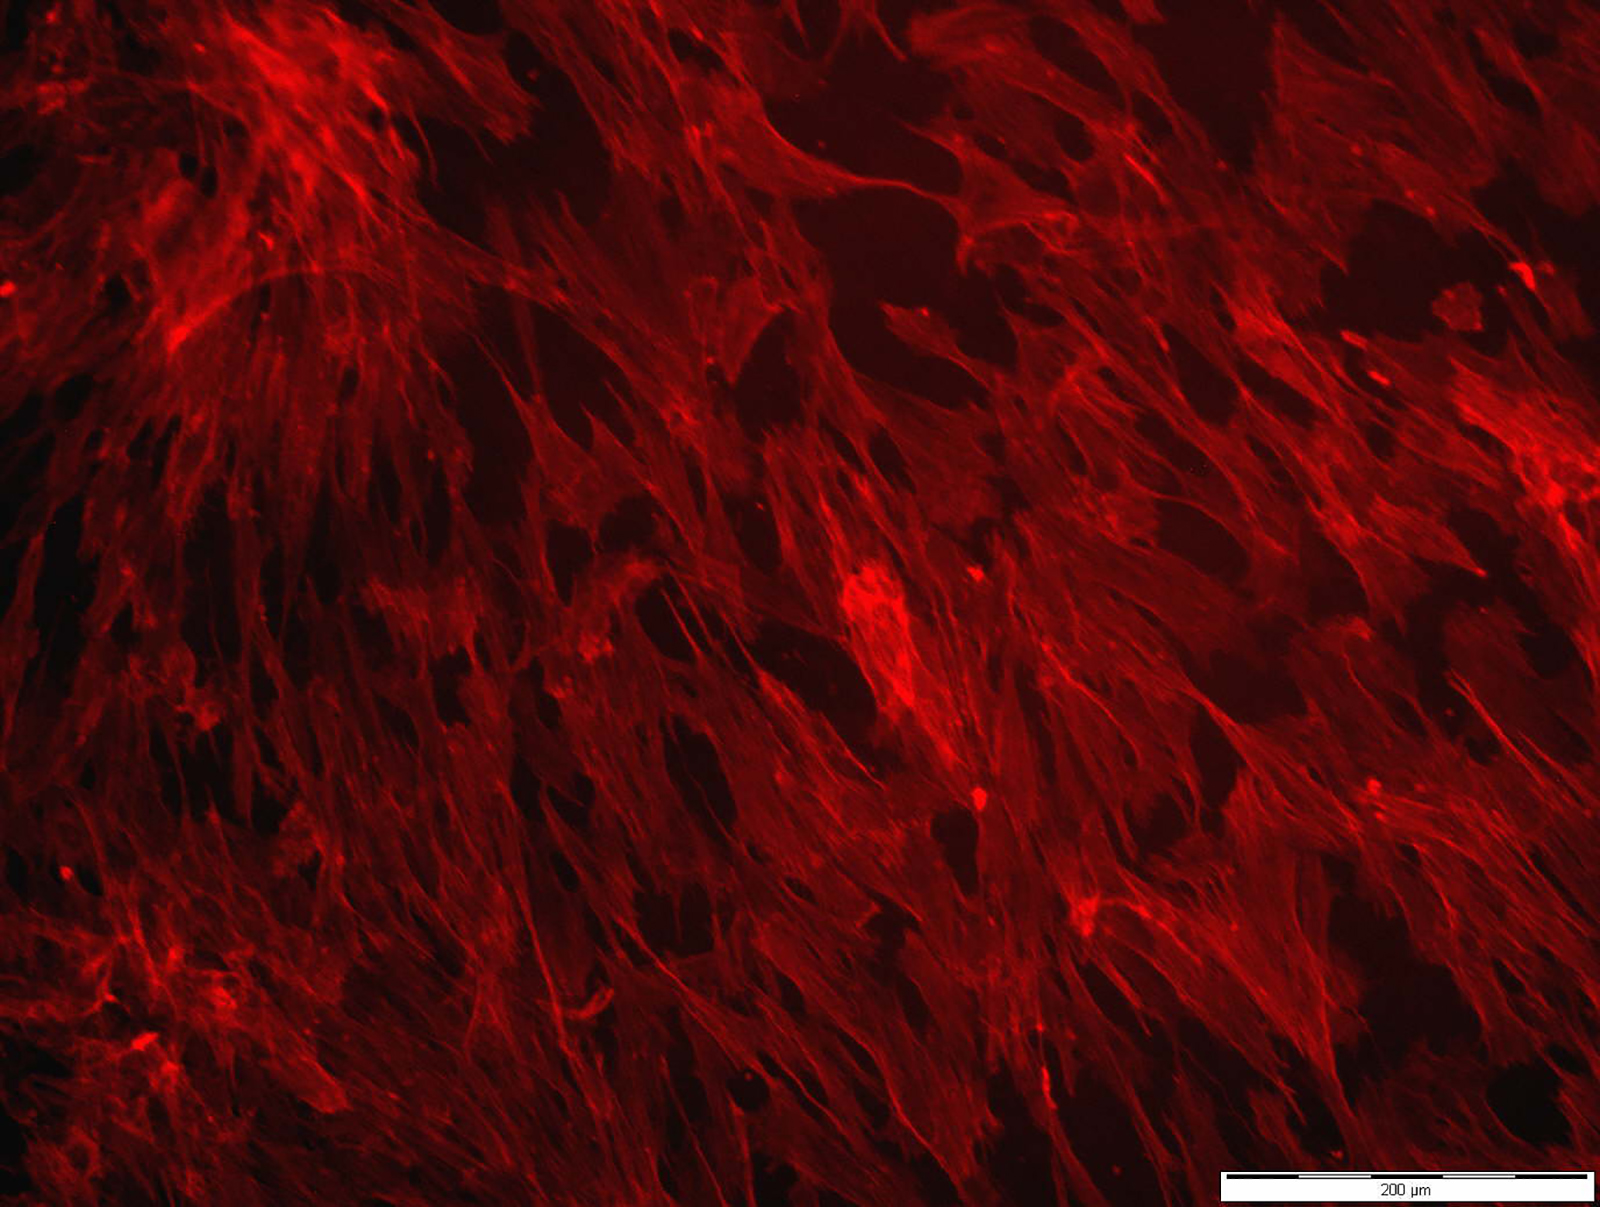 Human fibroblast cell sample, cultured on a porcine pericardium that was cross-linked using electron beams. Cells grow and even reproduce on the cyto-compatible pericardium.